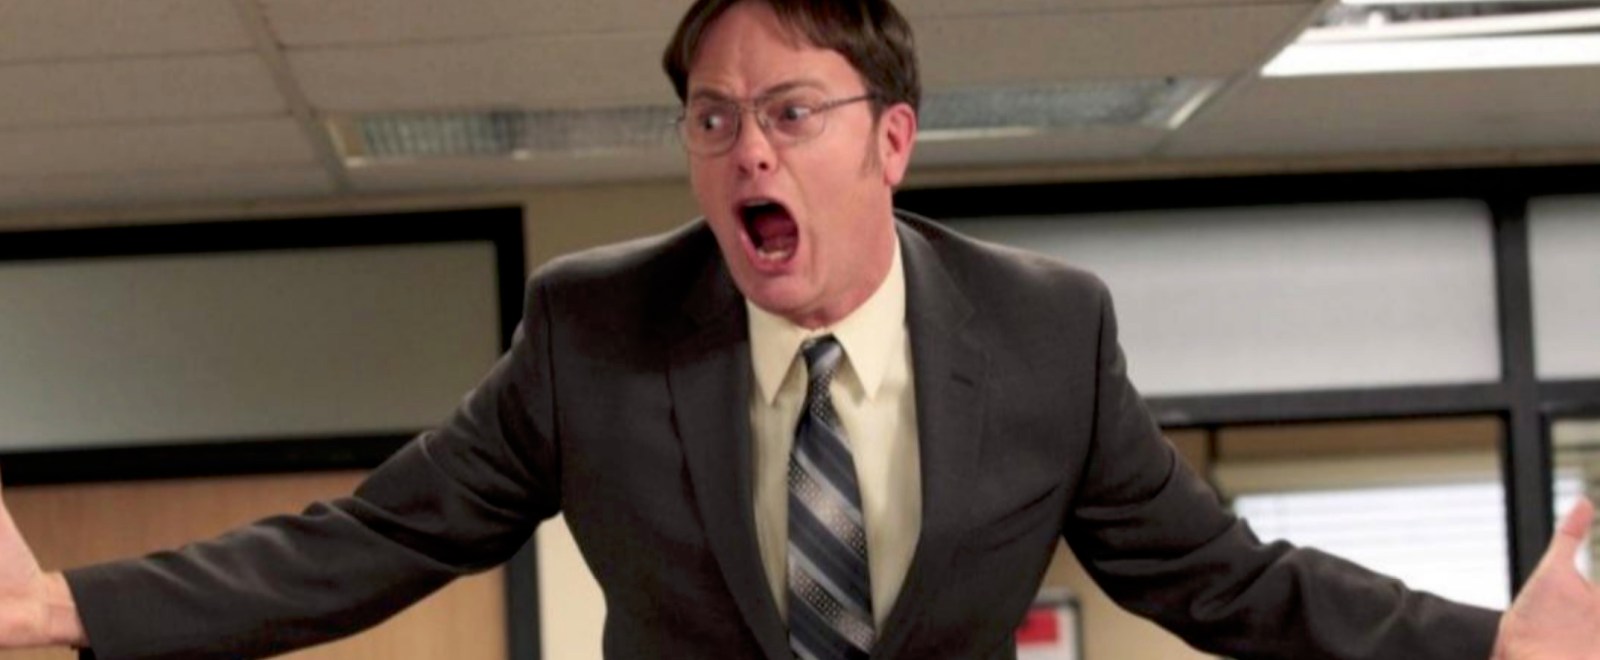 dwight the office